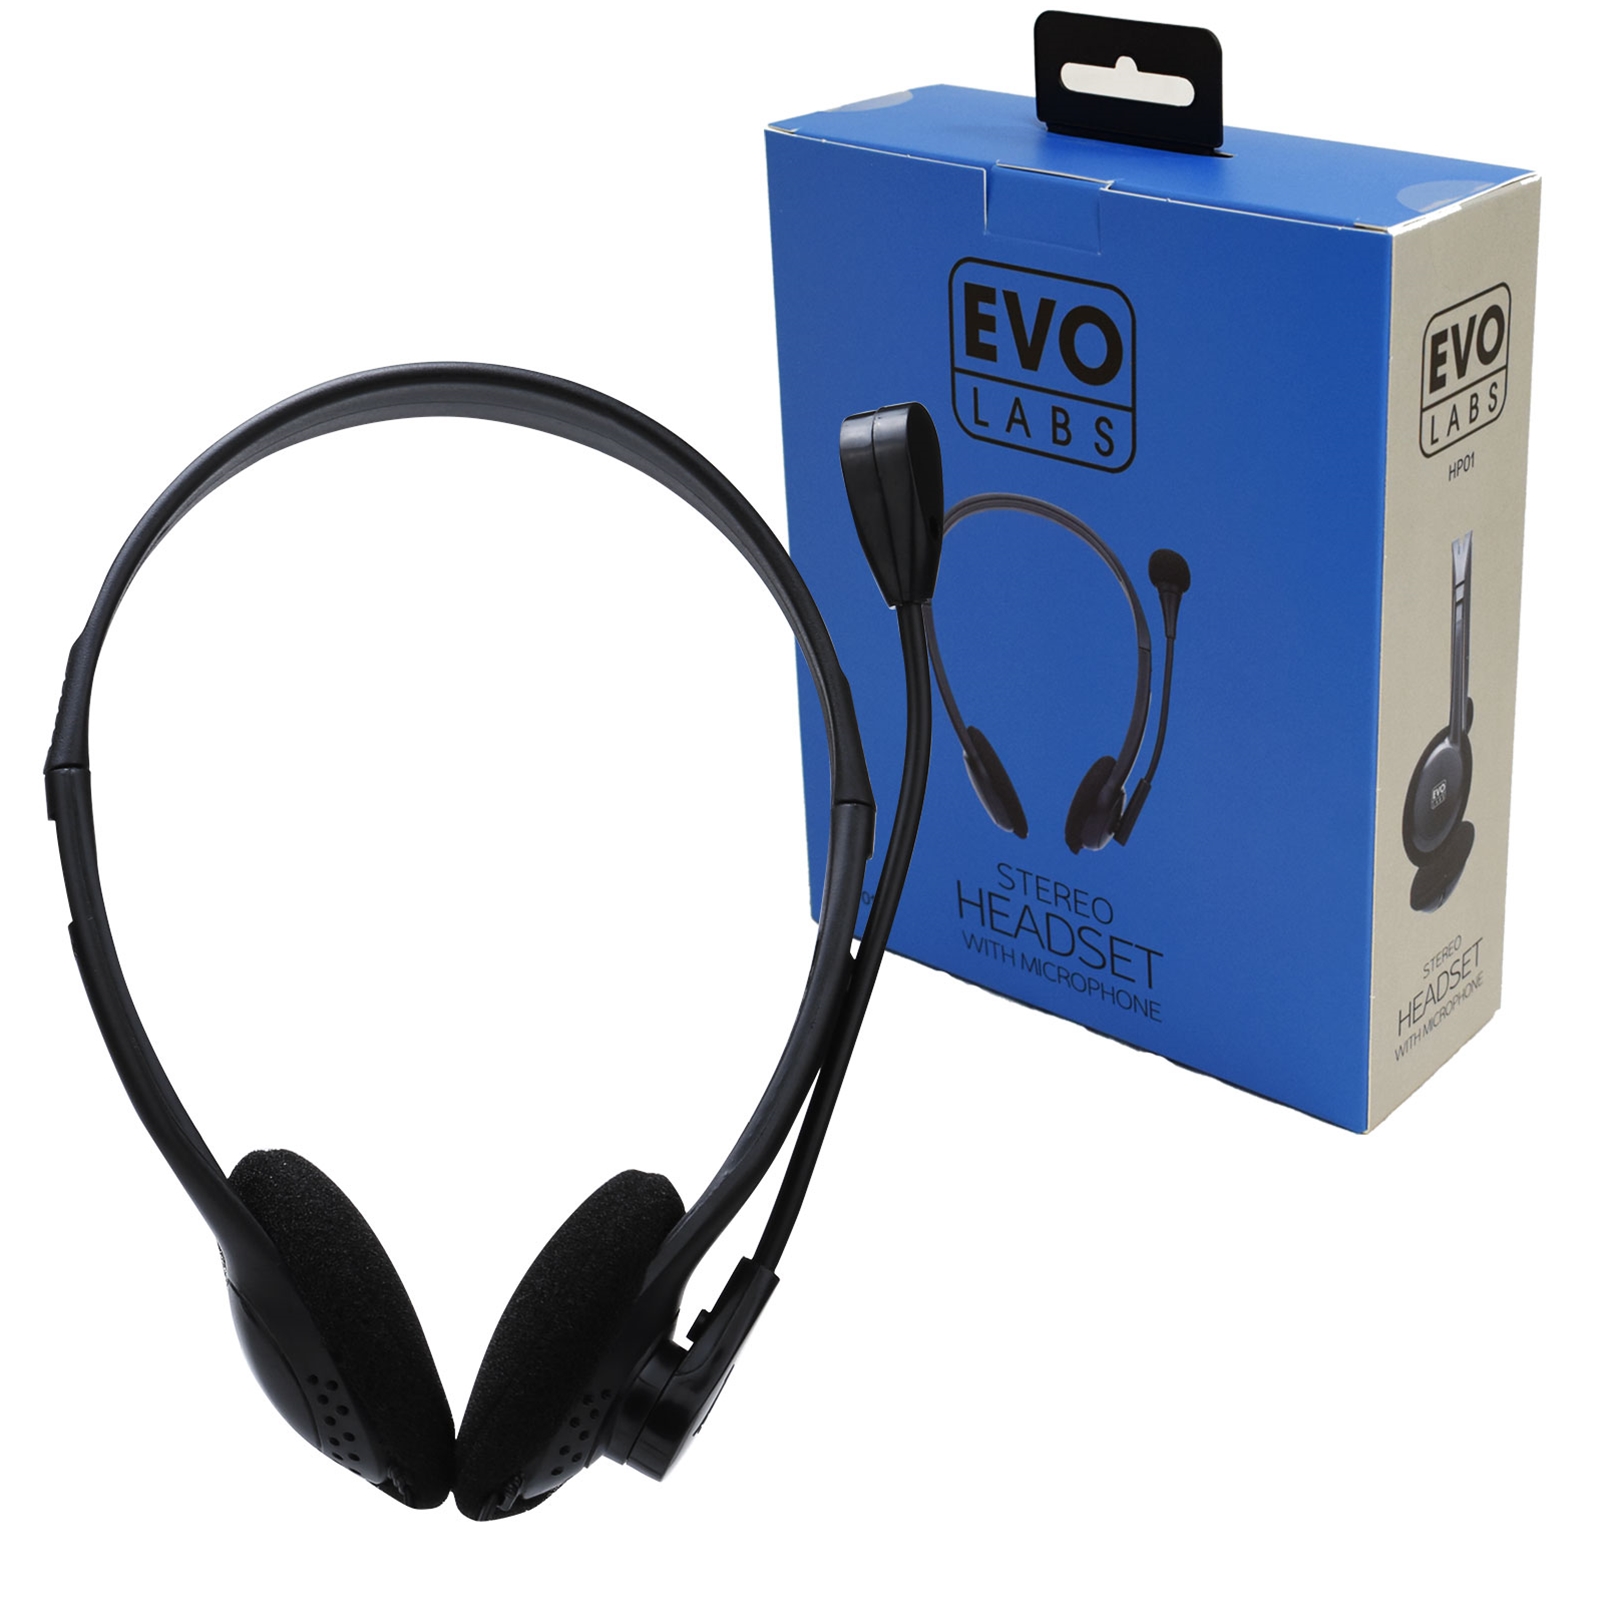 Evo Labs HP01 Headset with Mic, 2x 3.5mm Connection